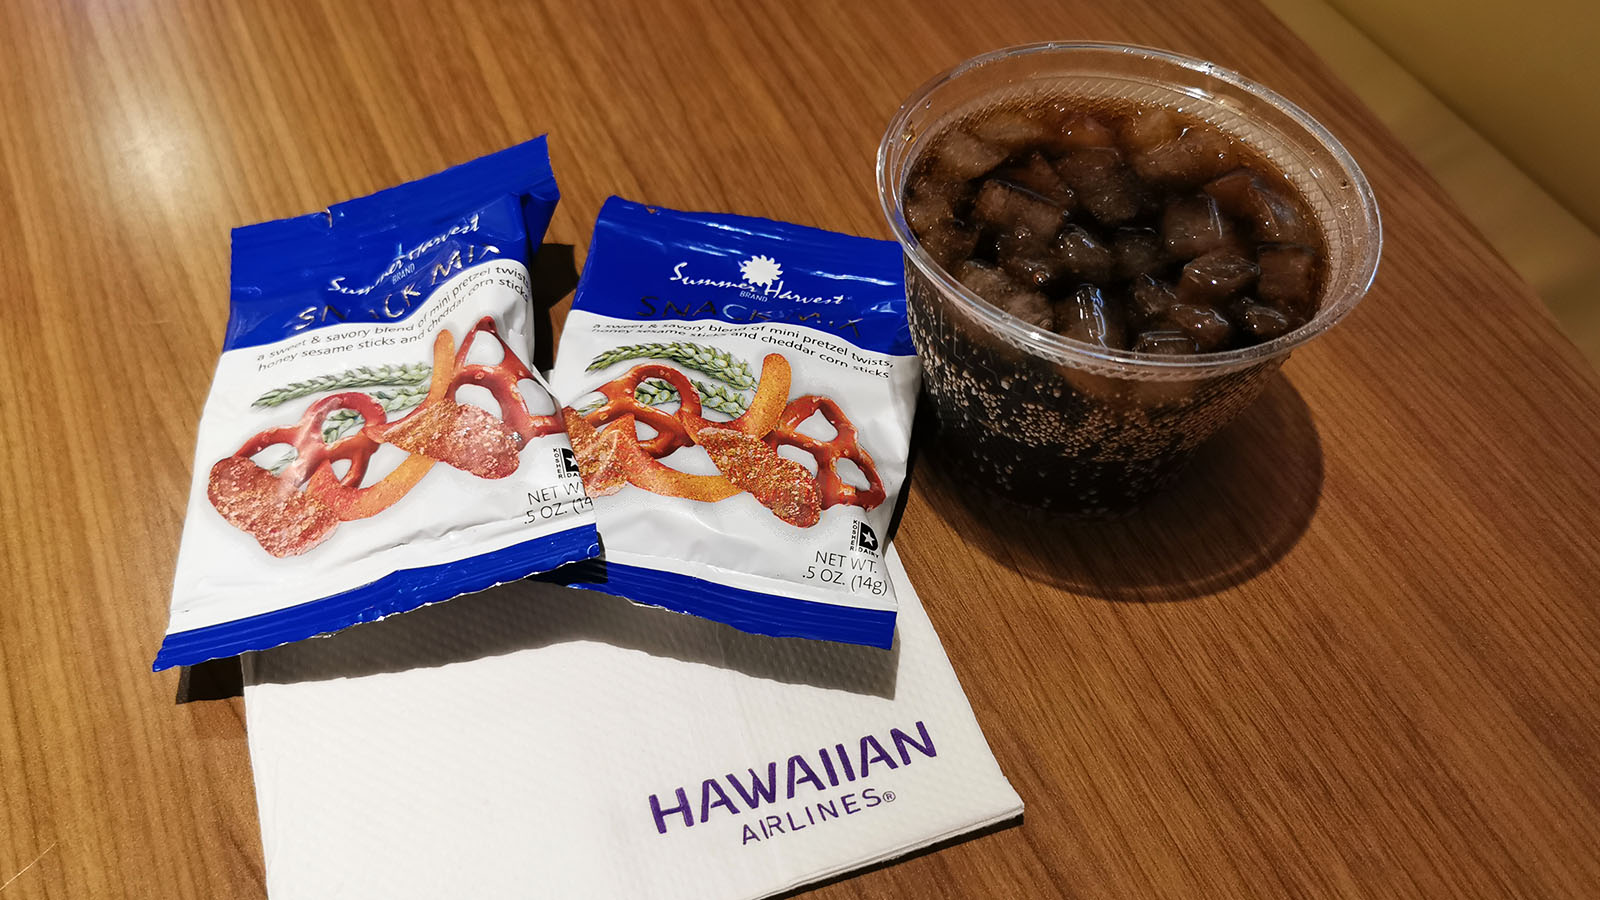 Refreshments in the Hawaiian Airlines Premier Club